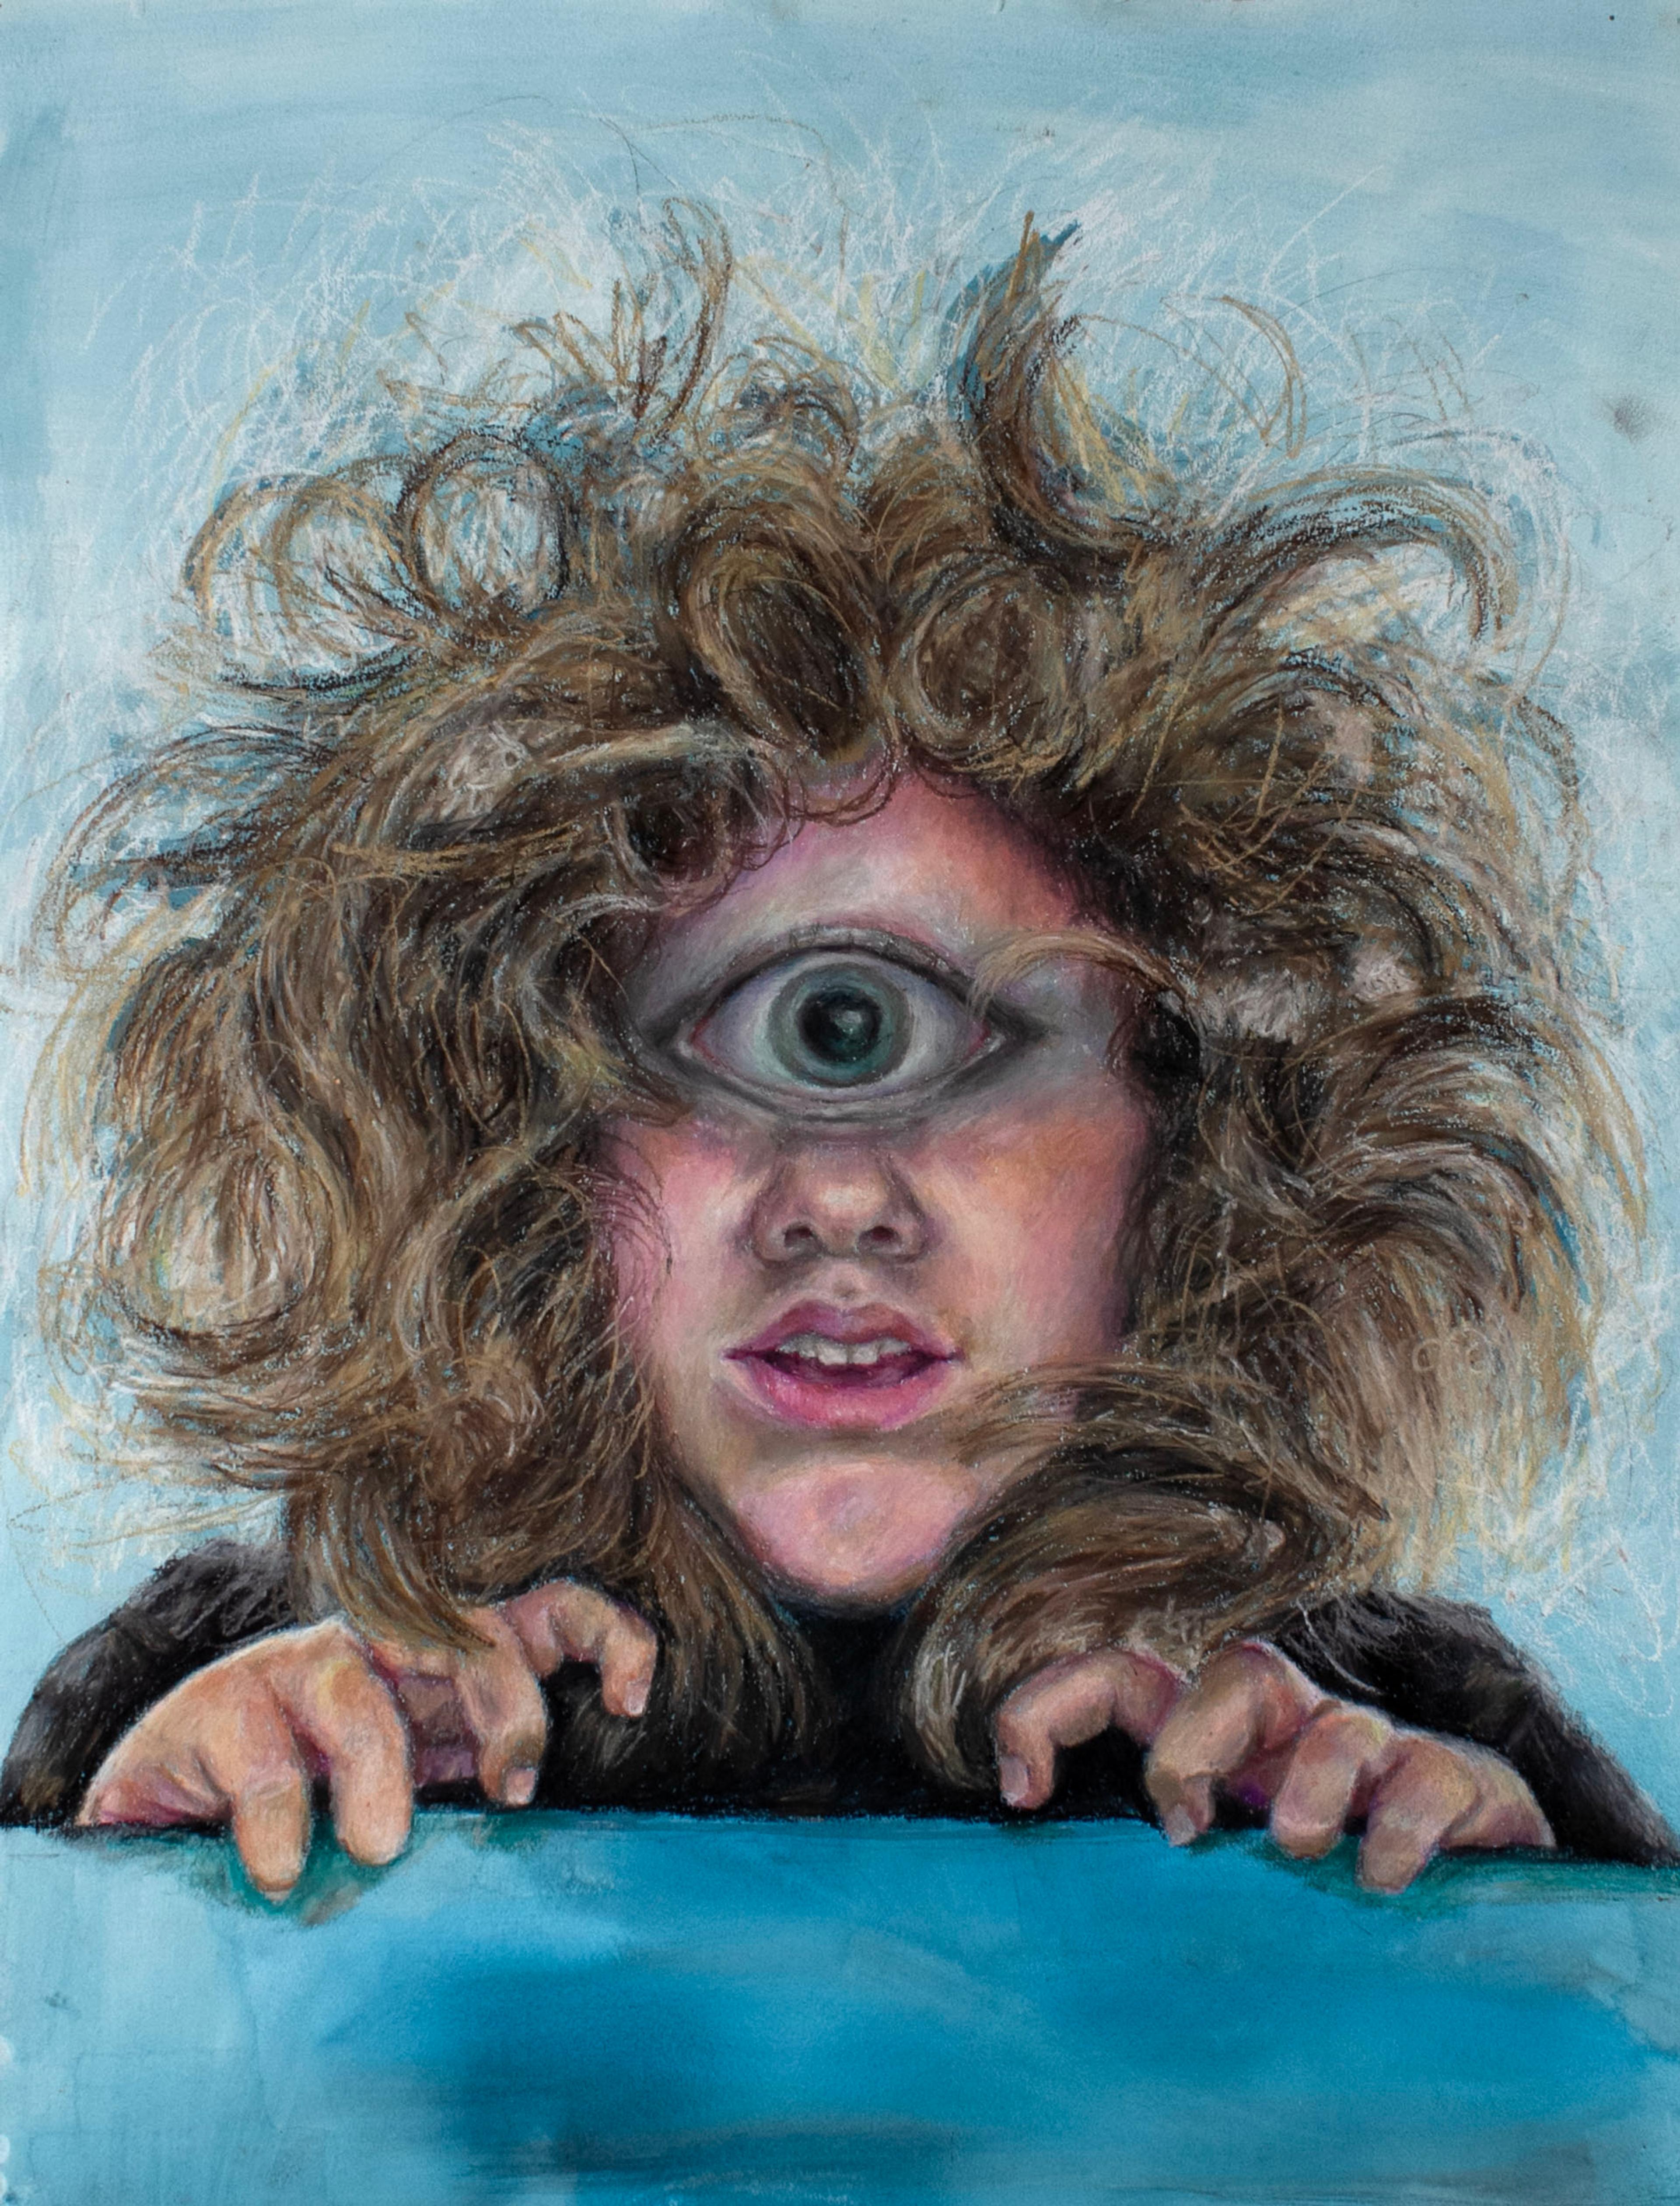 Illustration of a girl with tousled shoulder-length, sandy brown hair created with ccrylic wash, oil pastel, and pencil. The girl is leaning over a blue ledge with her hair hanging down and her fingers clutching the ledge. Her mouth is open, and she is depicted with a single, huge cyclopean eye above her nose, centered on her forehead. The girl stares directly at the viewer, and the background behind her is a pale blue.